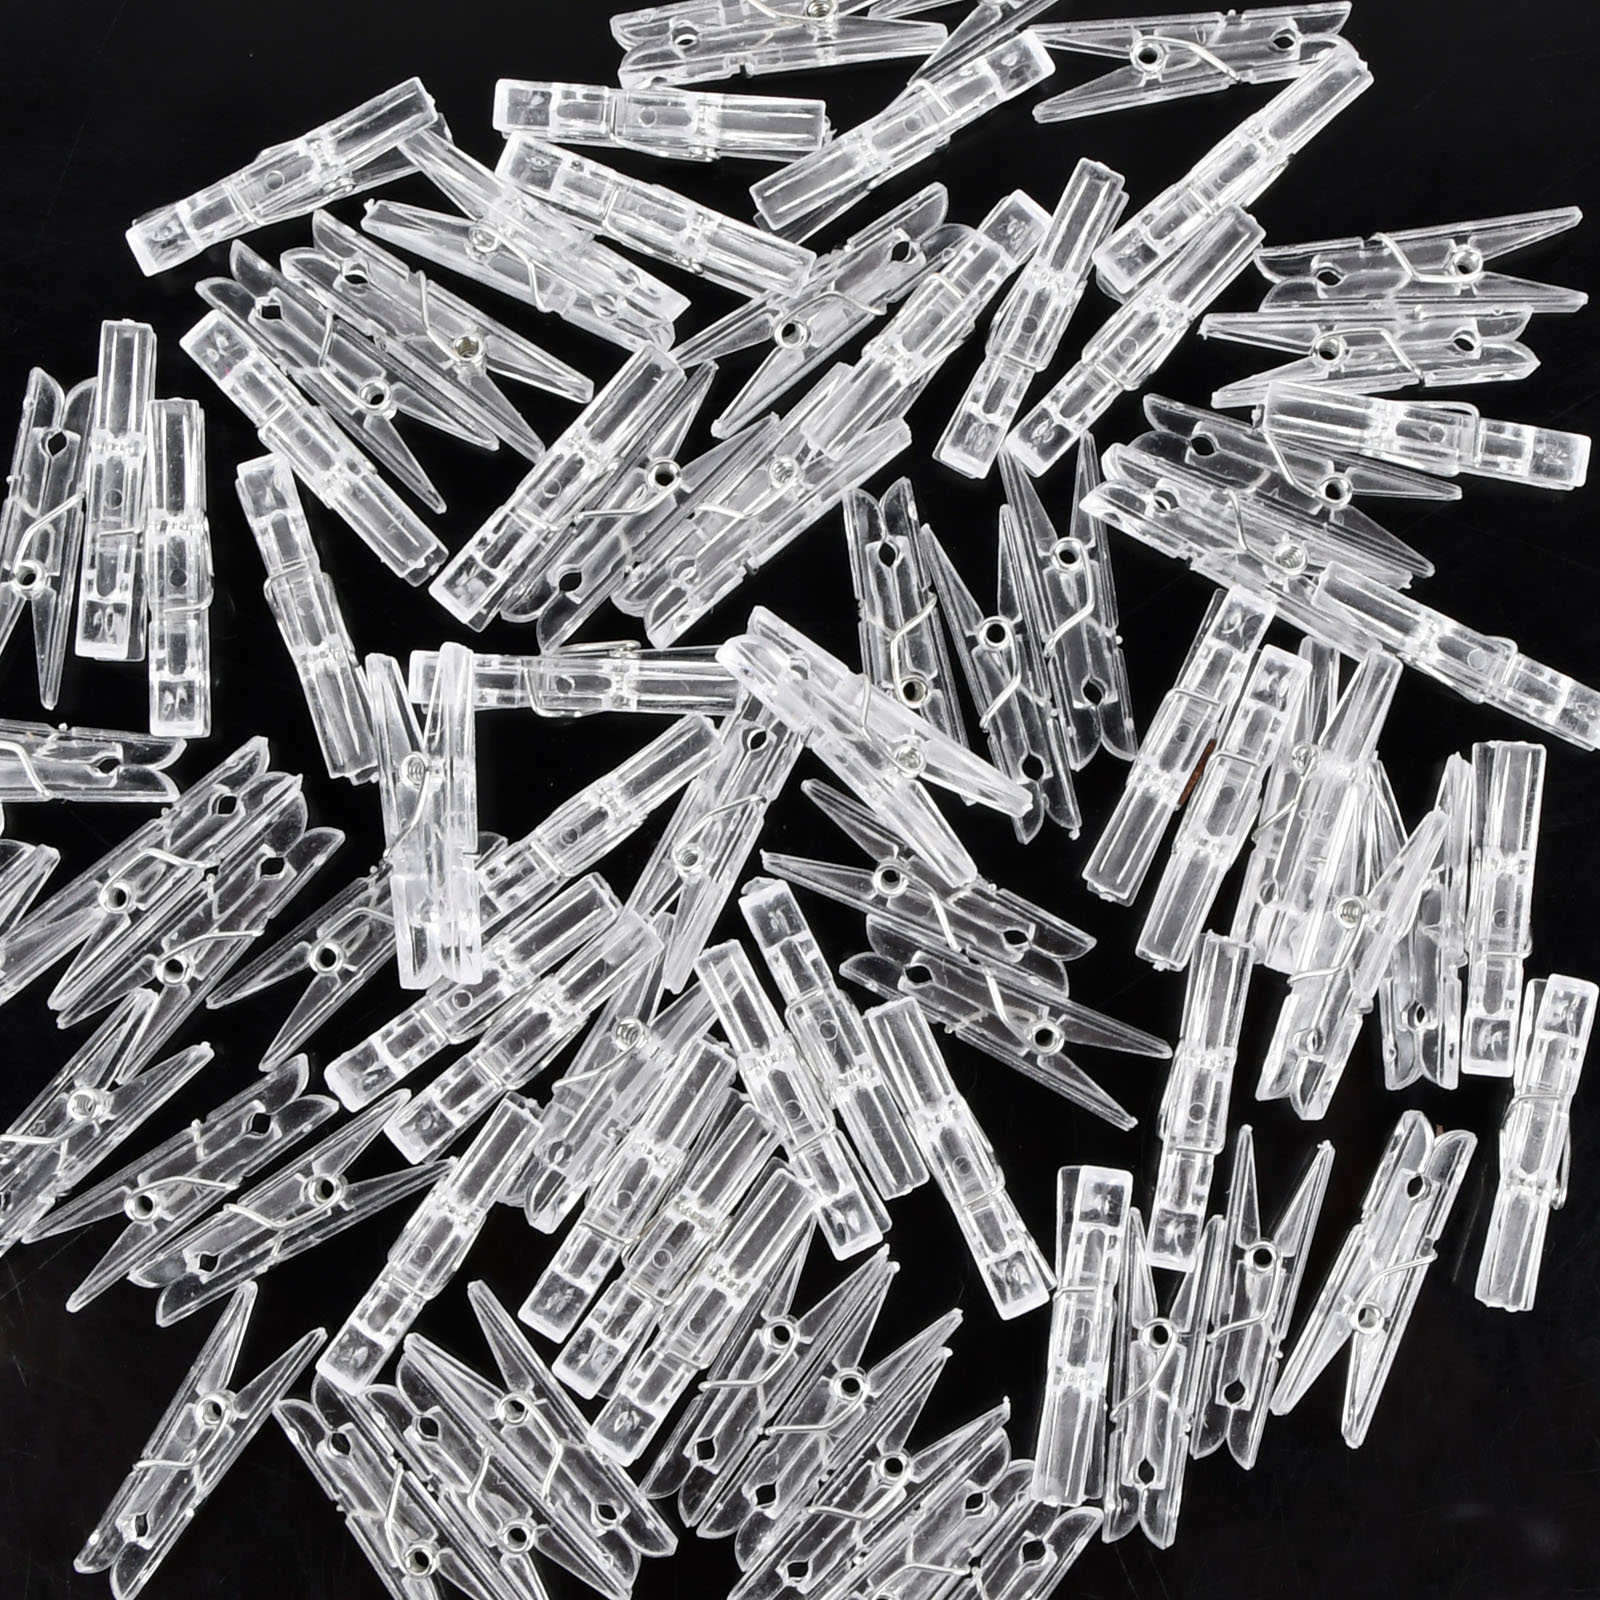 100pcs Mini Pegs For Photos Tiny Photo Clips, Clear Plastic Clothes Pegs,  Plastic Photo Paper Clip, Small Clothespins For Pictures Decorative Pegs For